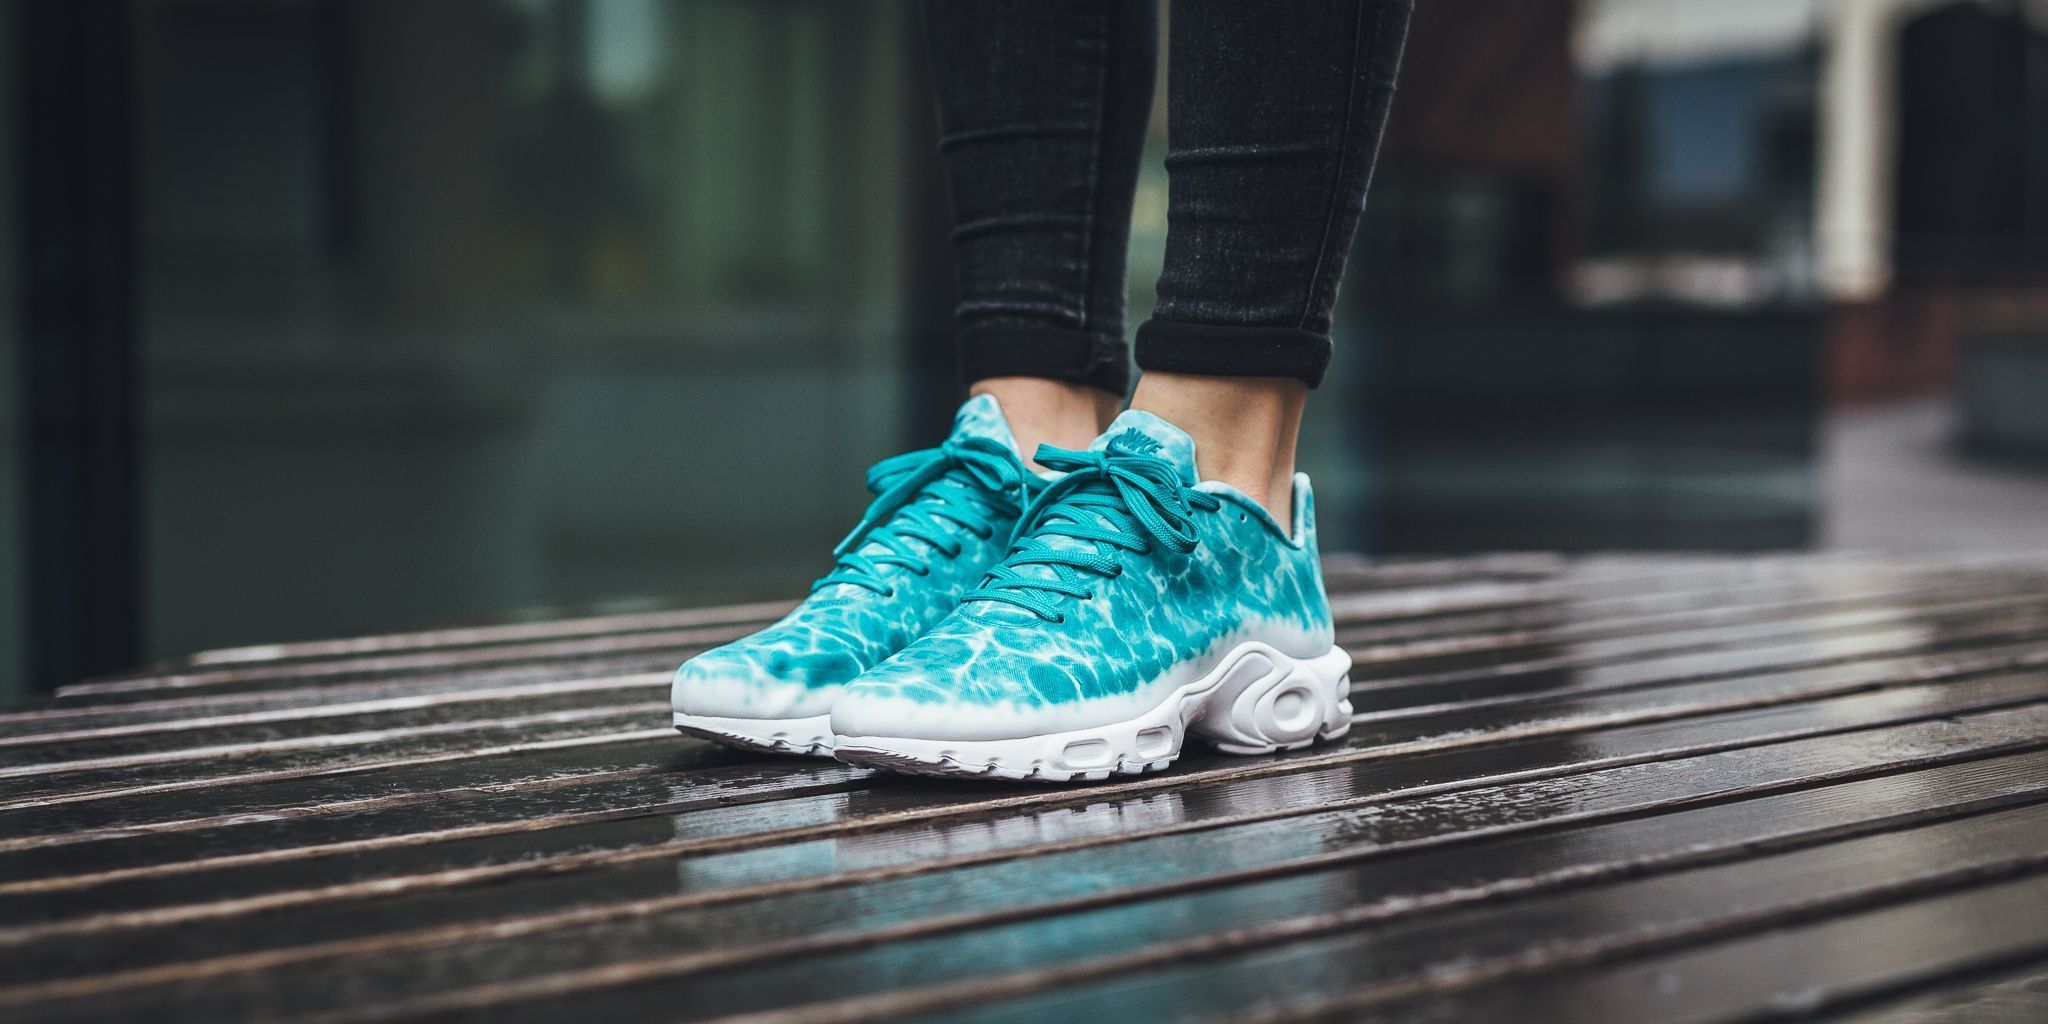 Titolo on Twitter: "ONLINE NOW! Nike Air Max GPX Premium SP - Turbo Green/Turbo Green-White SHOP HERE: https://t.co/KtTqYEqcV6 #requin # swimmingpool https://t.co/pD7s6DPBuP" / Twitter